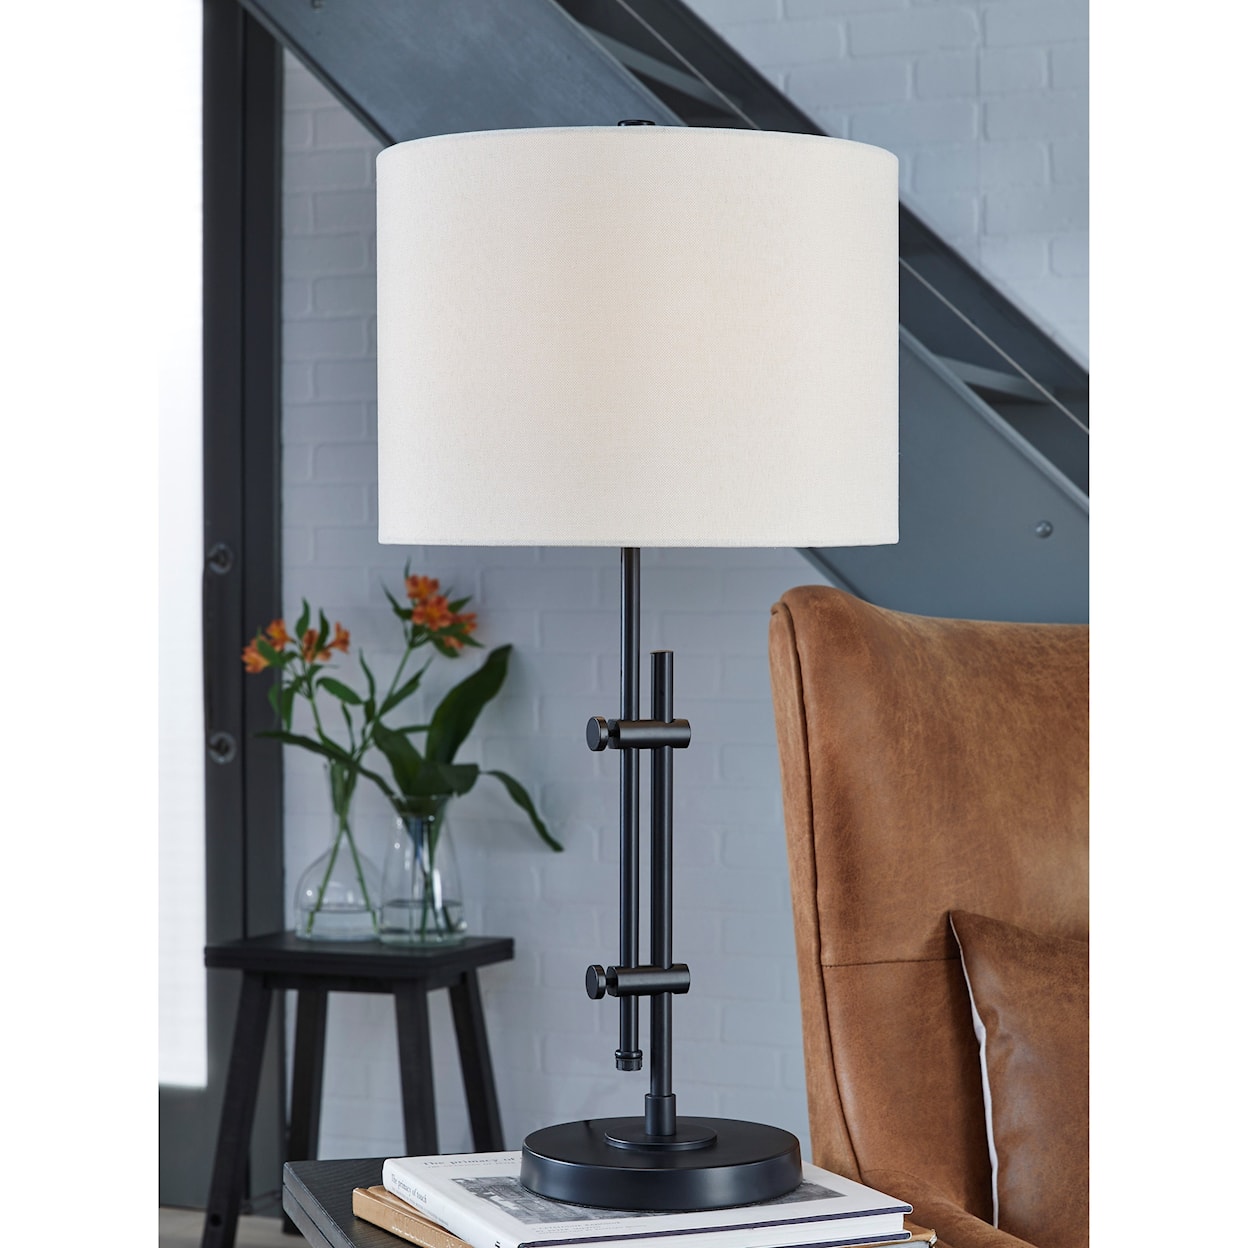 Signature Design by Ashley Lamps - Casual Baronvale Table Lamp